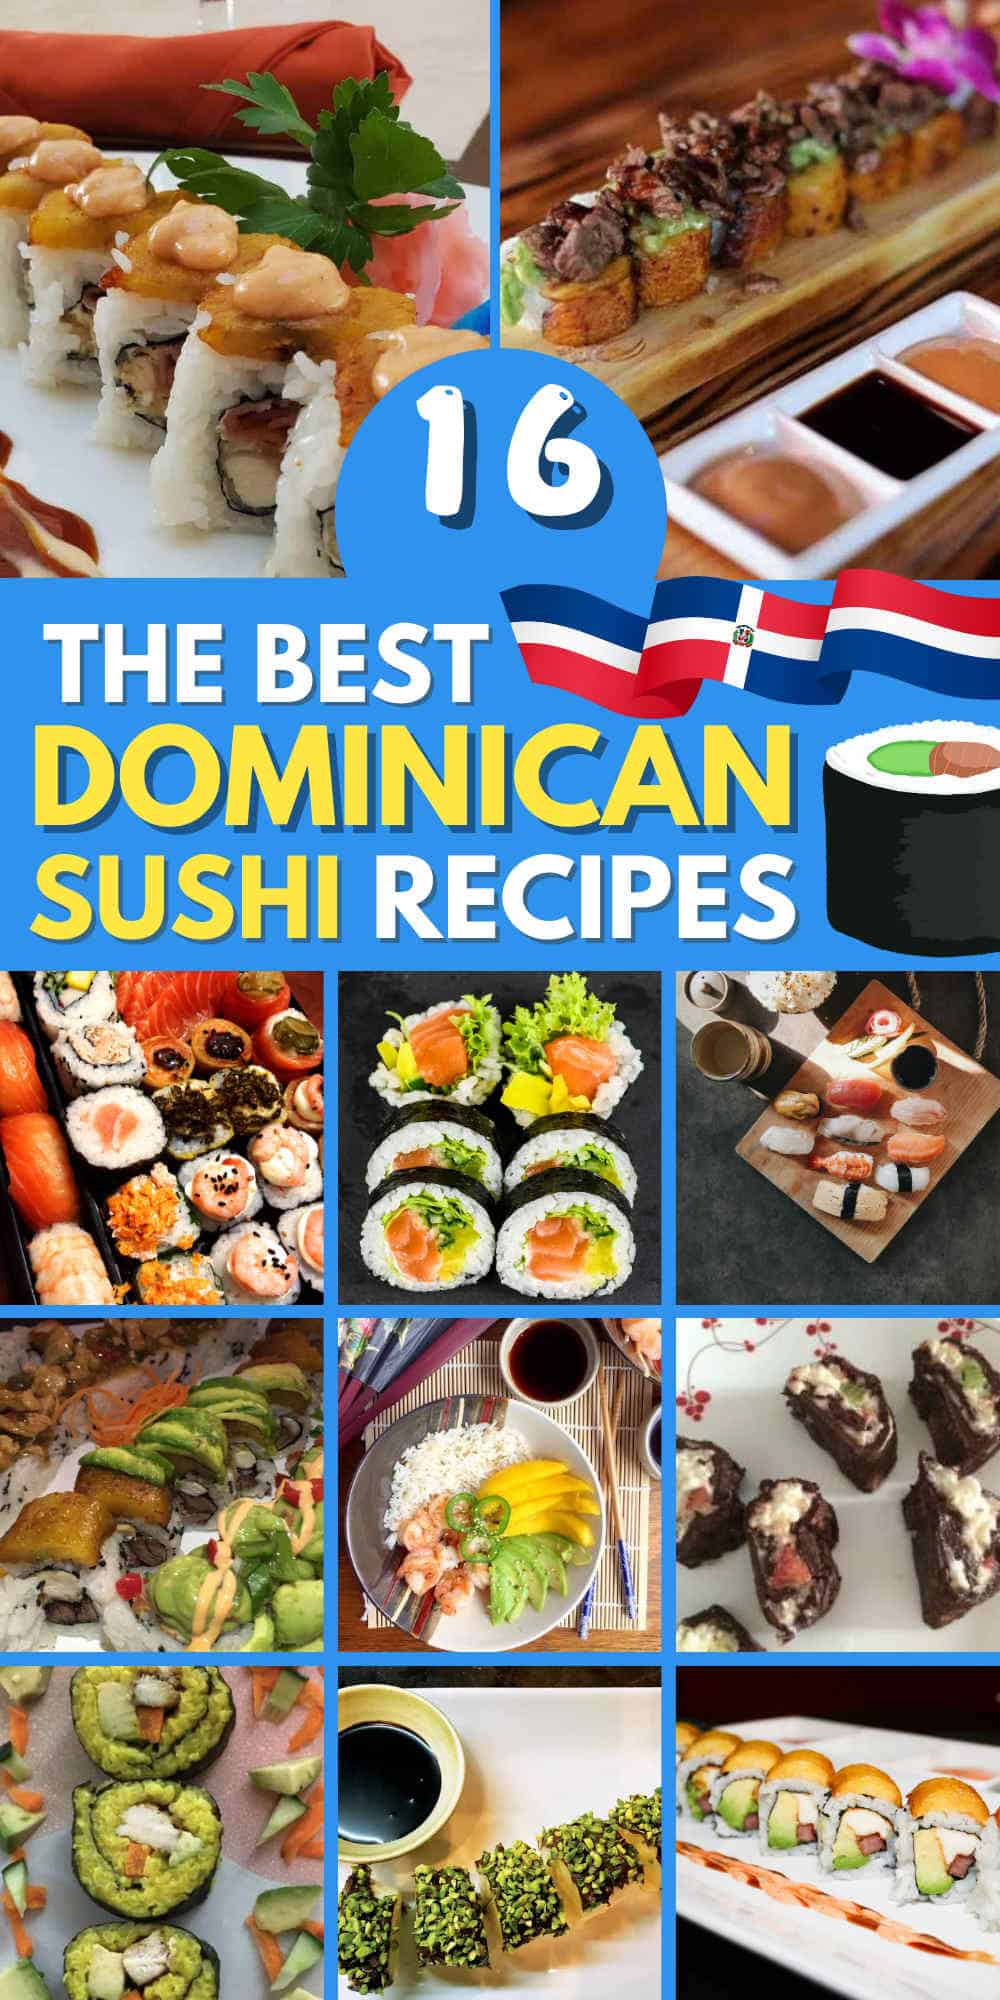 dominican sushi